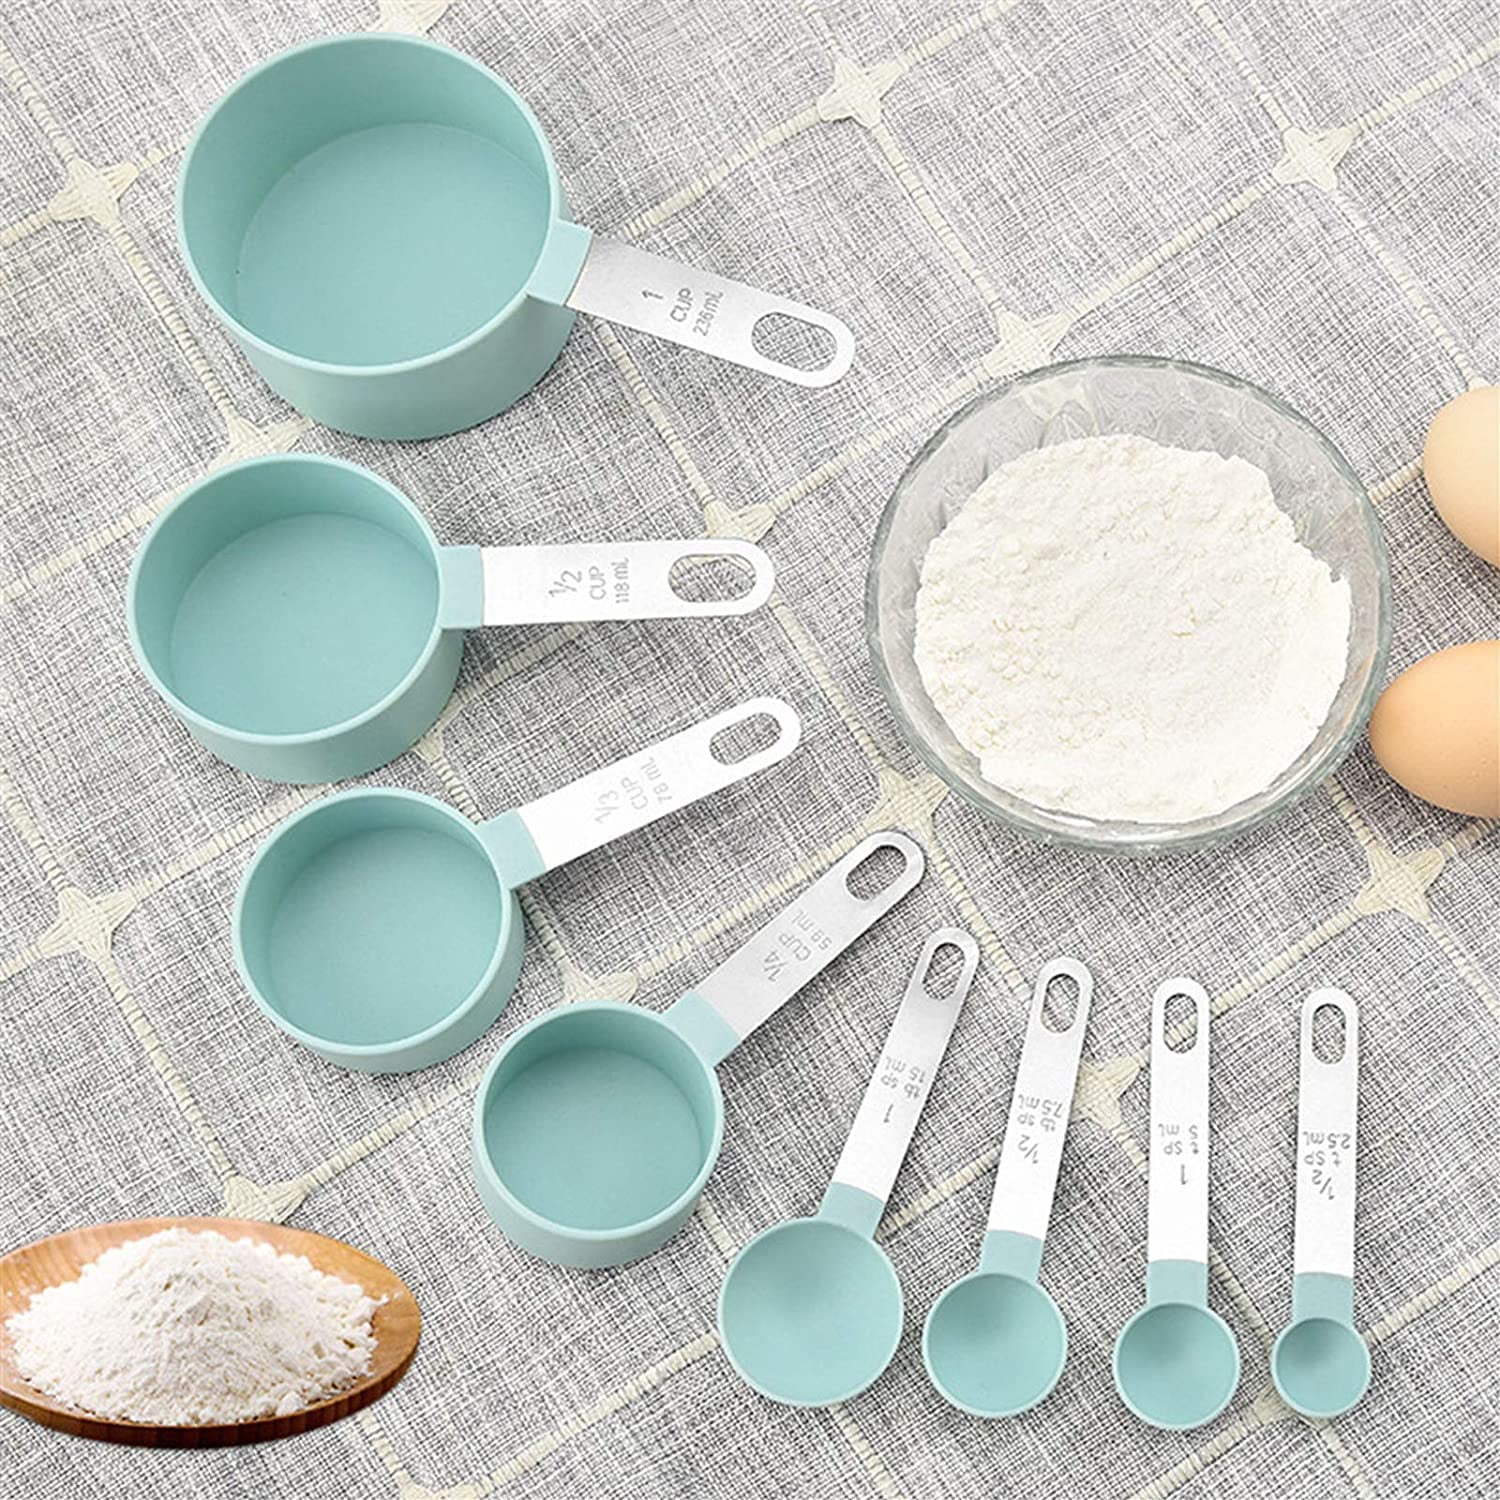 Jeexi Measuring Cups and Spoons Set of 12 Pieces, Nesting Measure Stackable Cups for Dry and Liquid Ingredients, Great for Baking and Cooking (Random